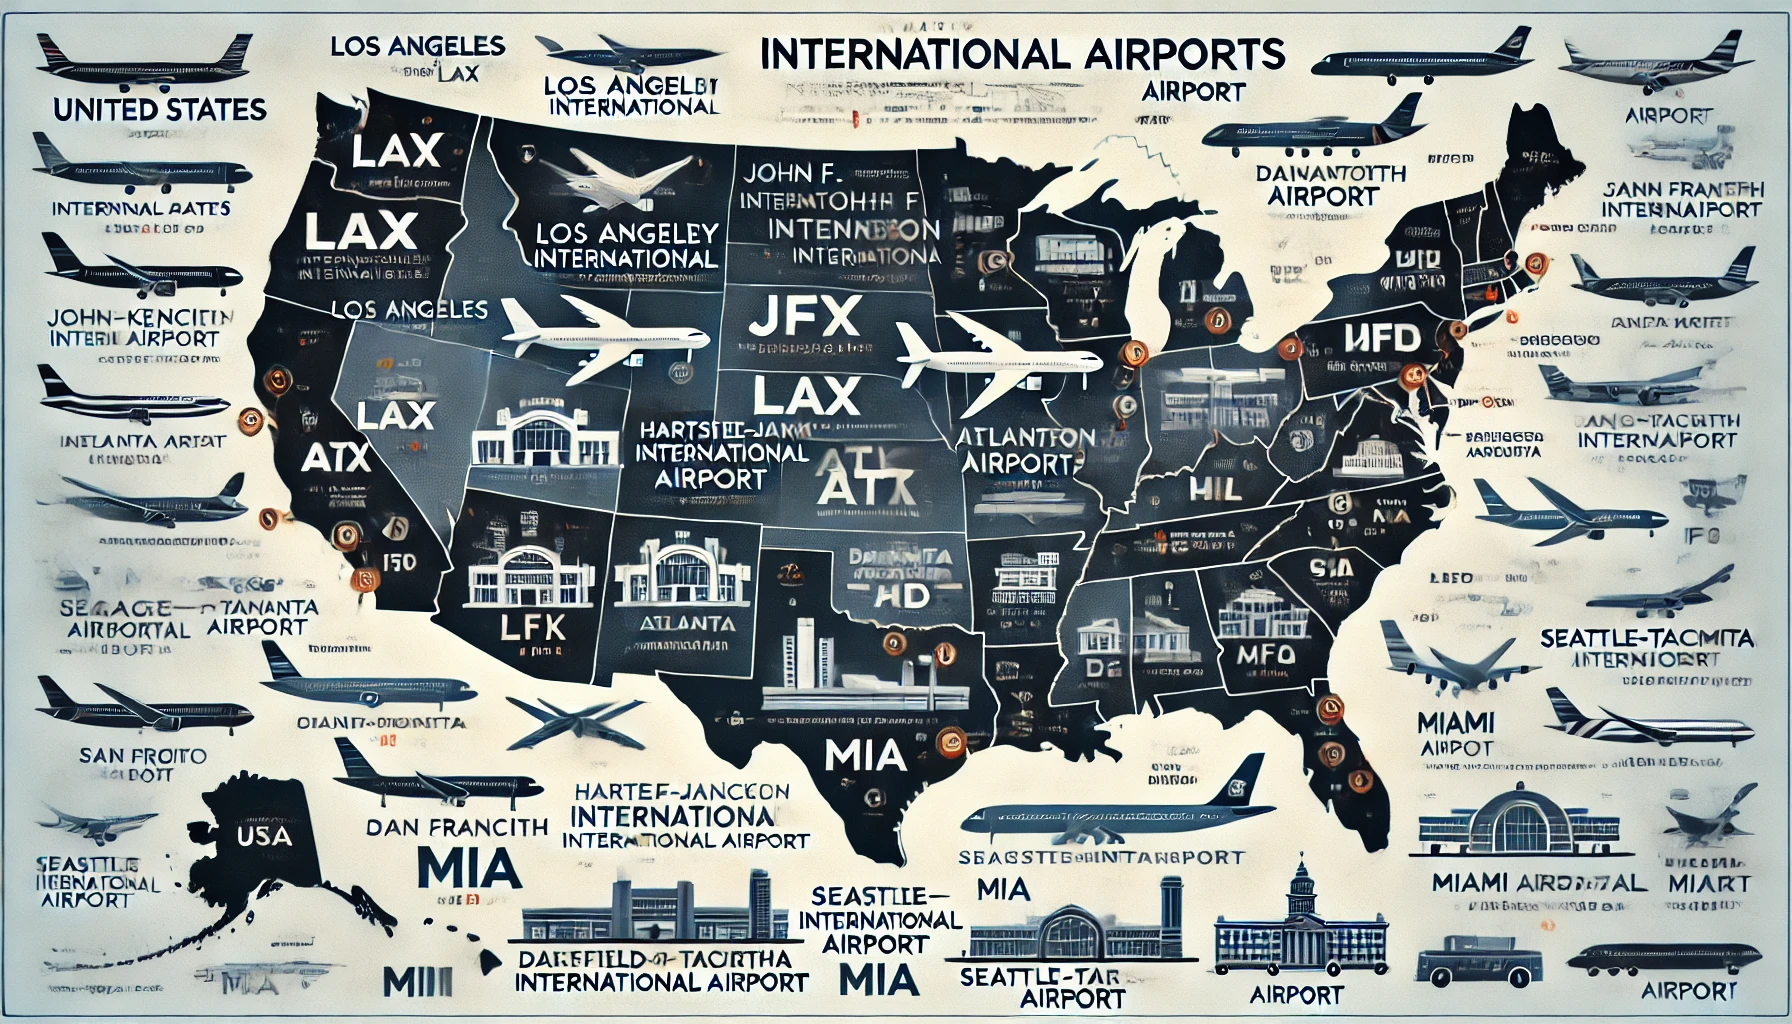 International Airports in the United States